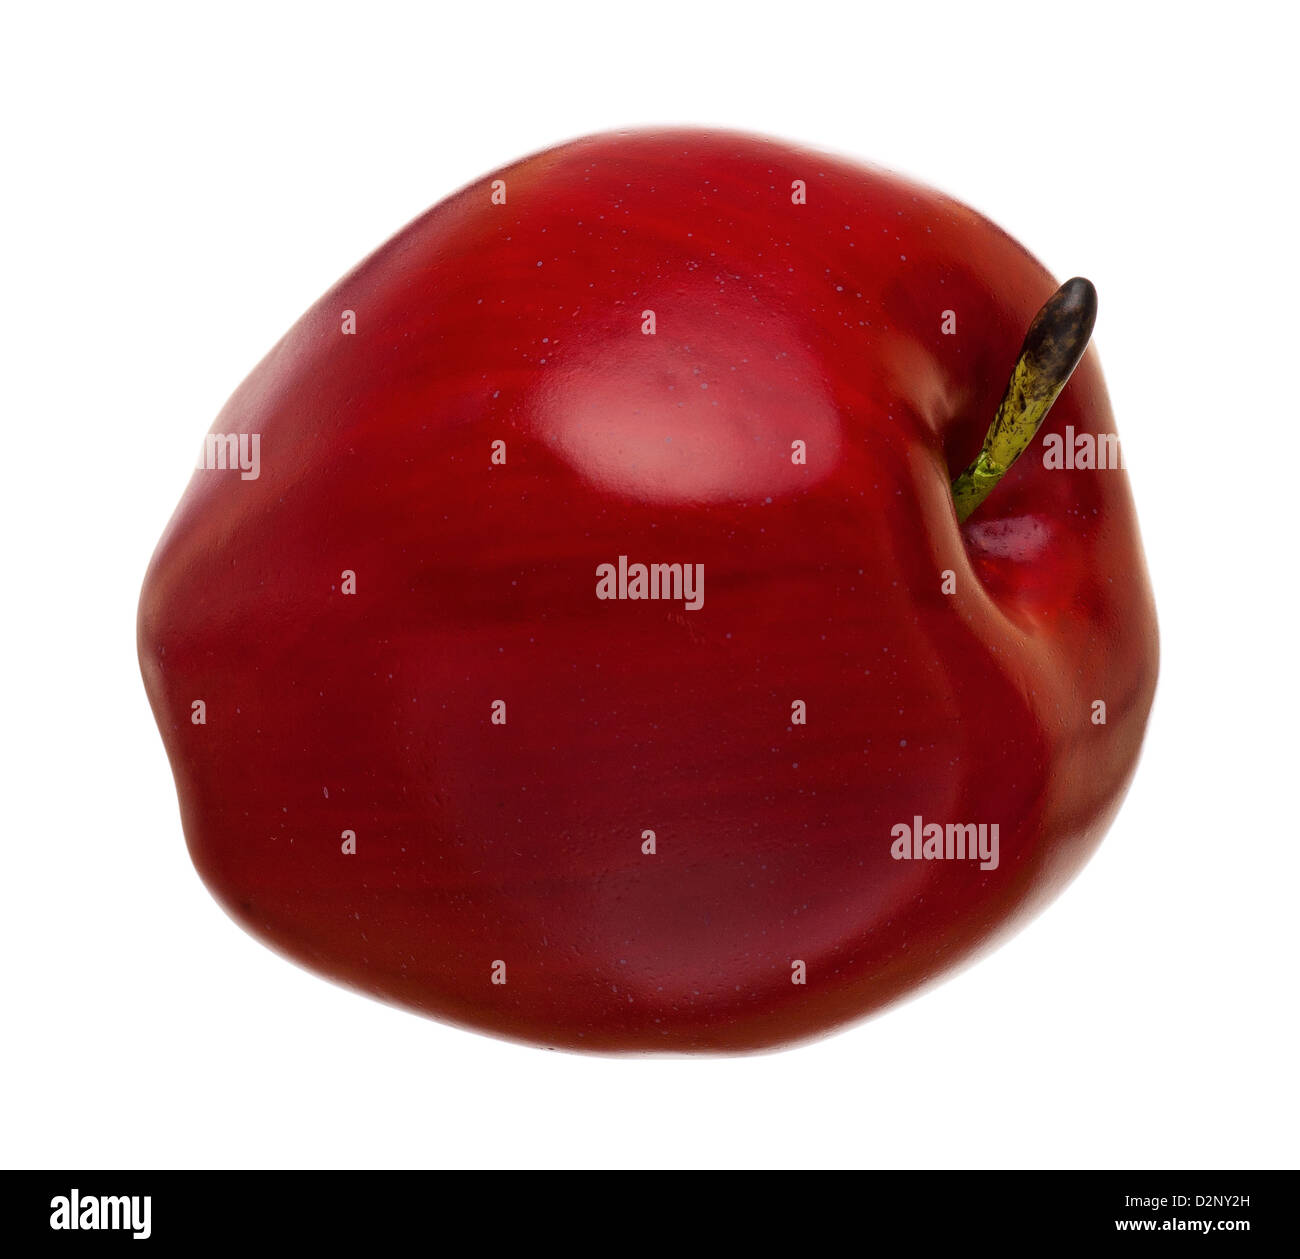 Artificial red apple, isolated on white background Stock Photo